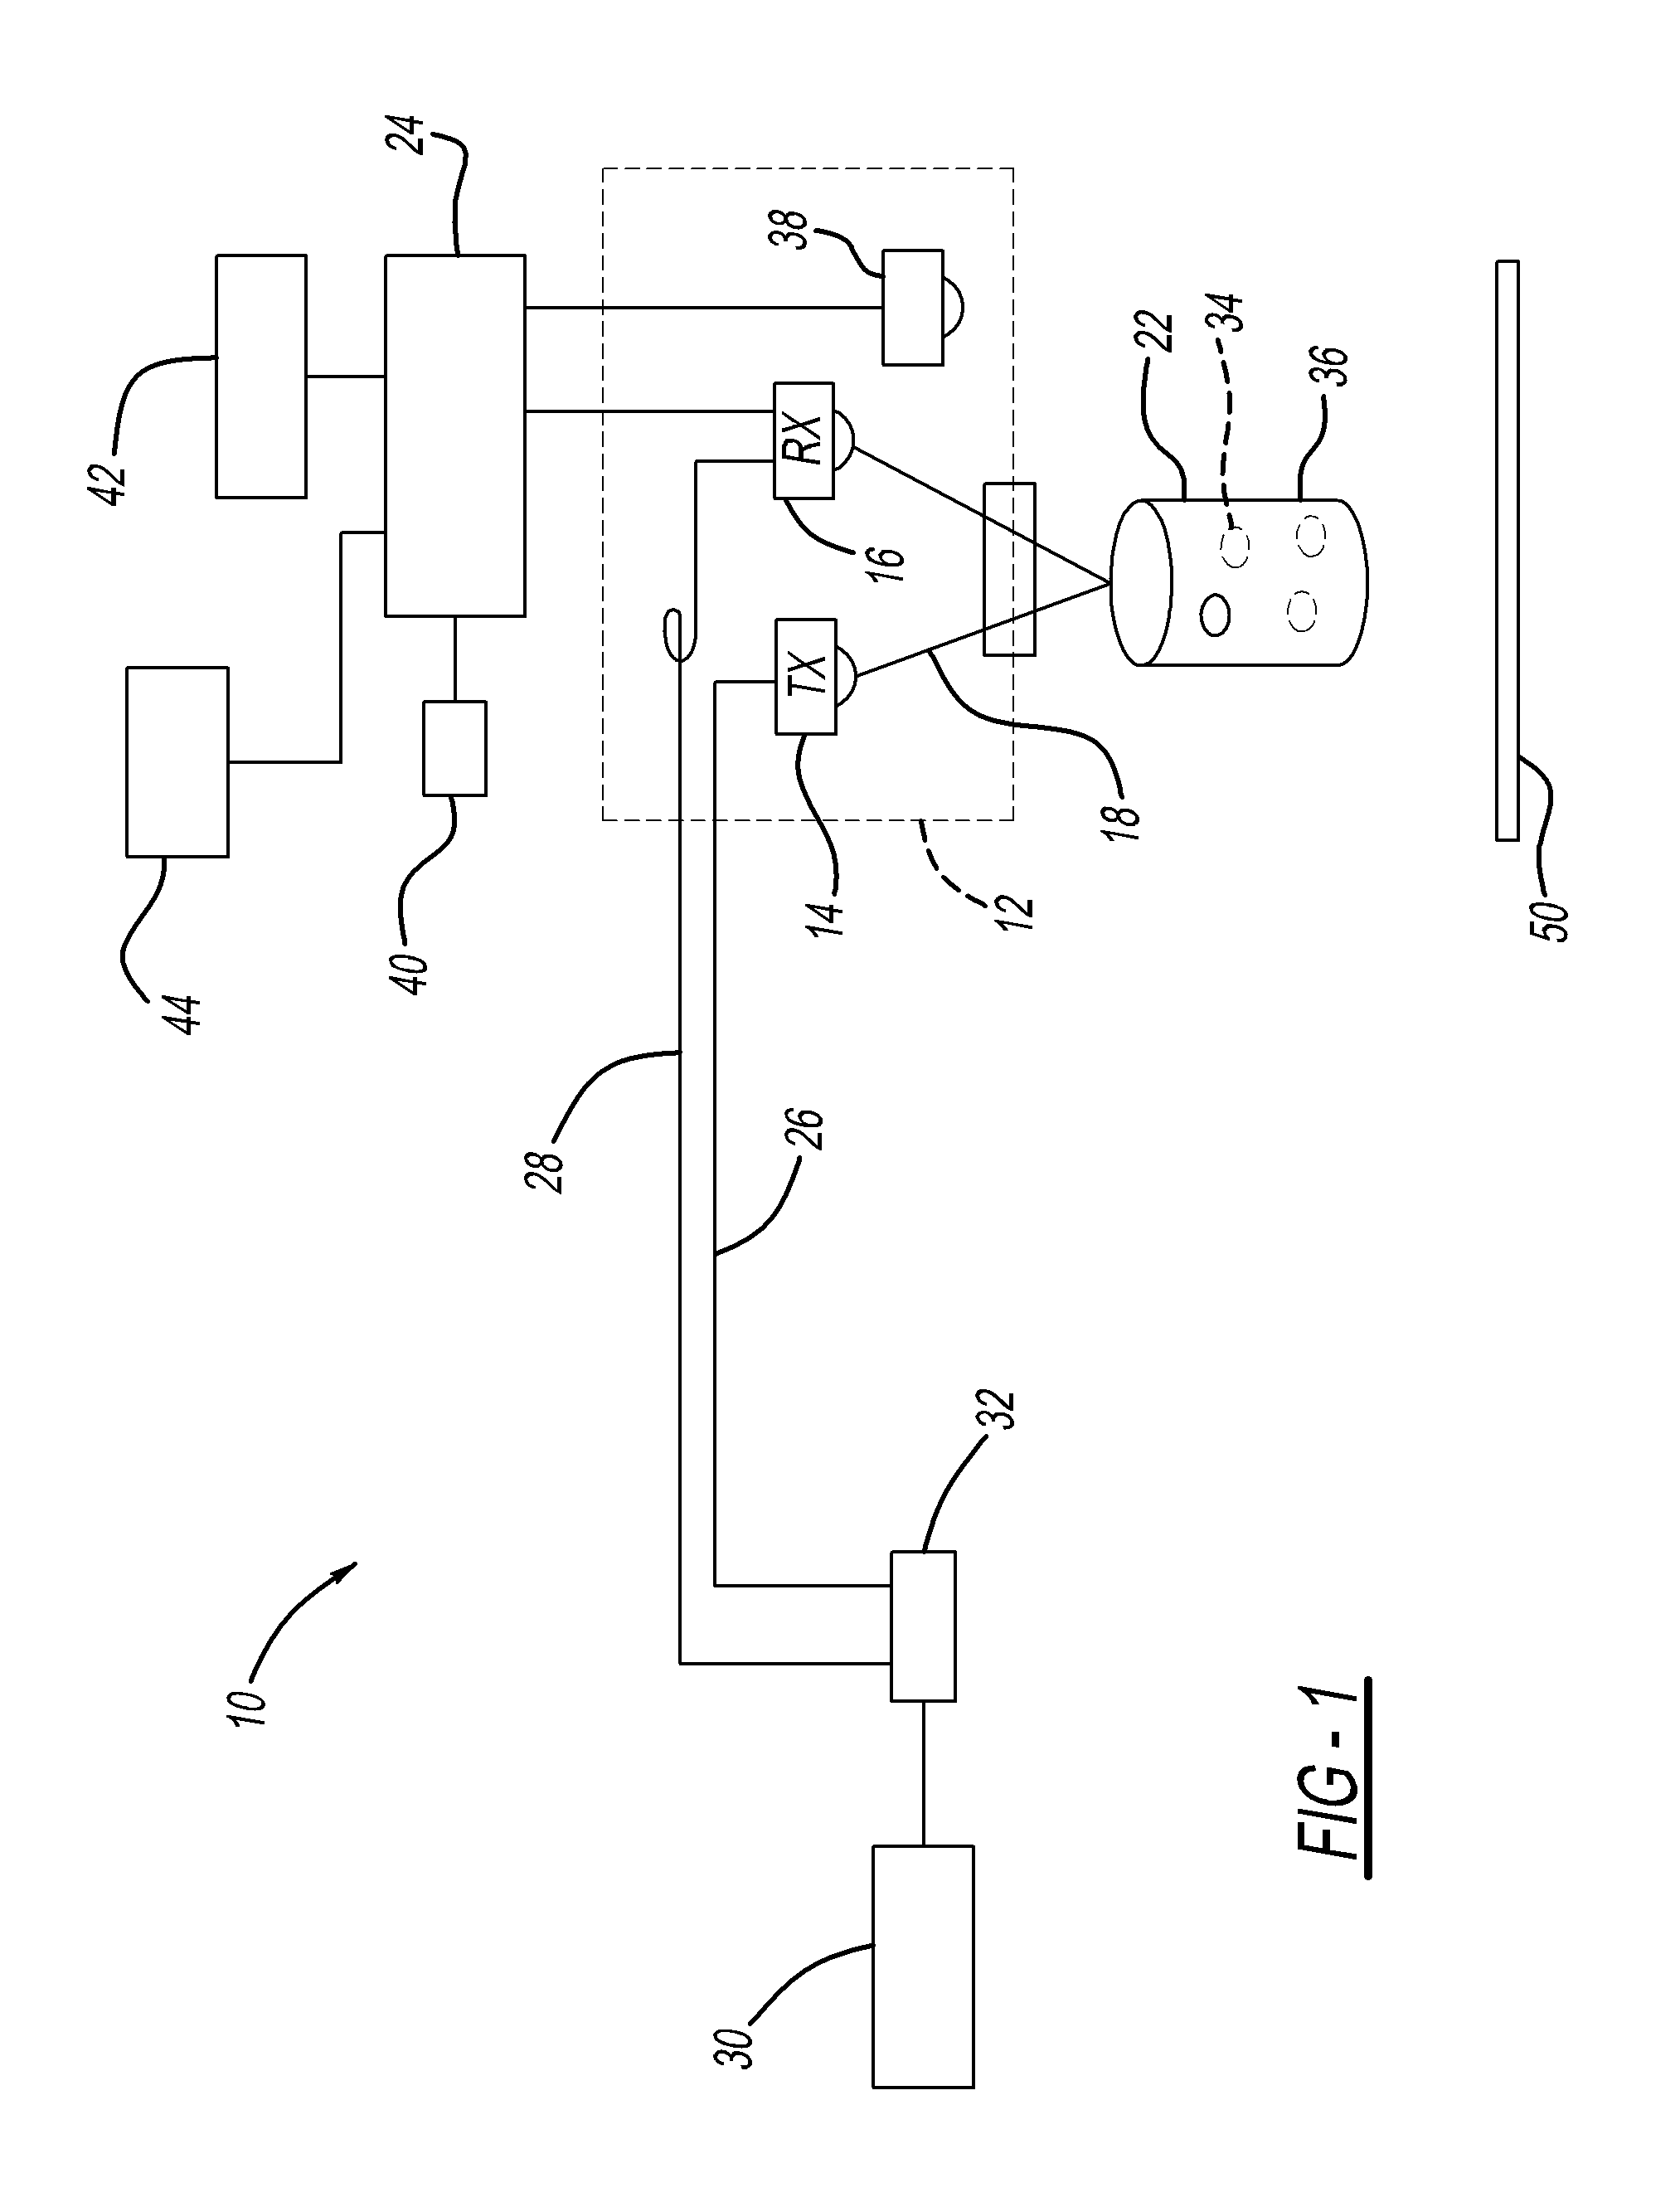 System and method to detect anomalies